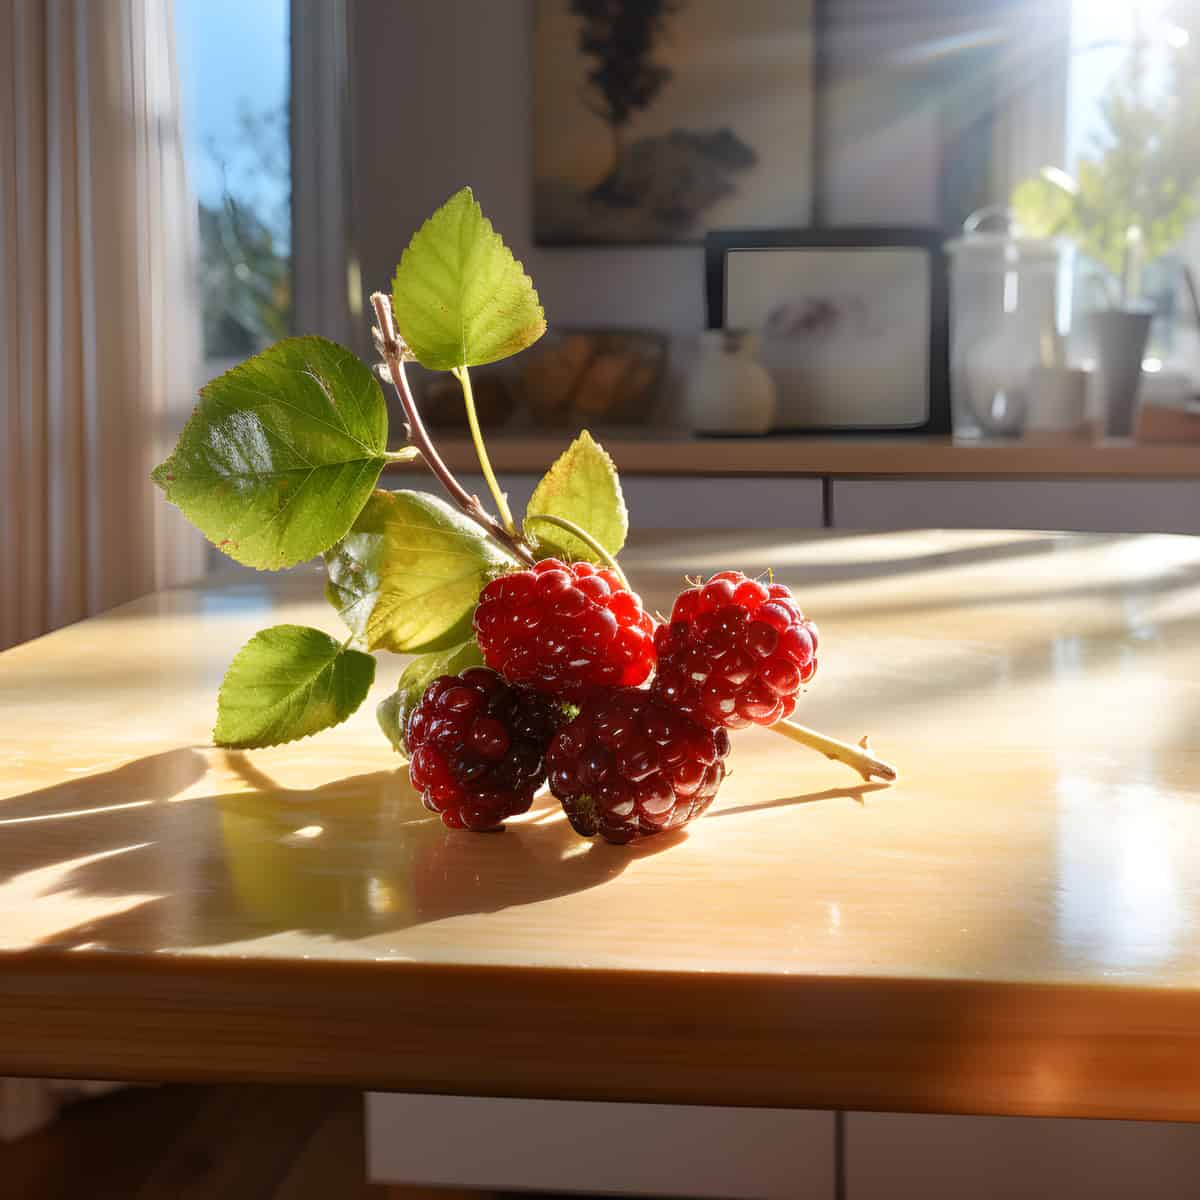 Fiveleaved Bramble Berries on a kitchen counter